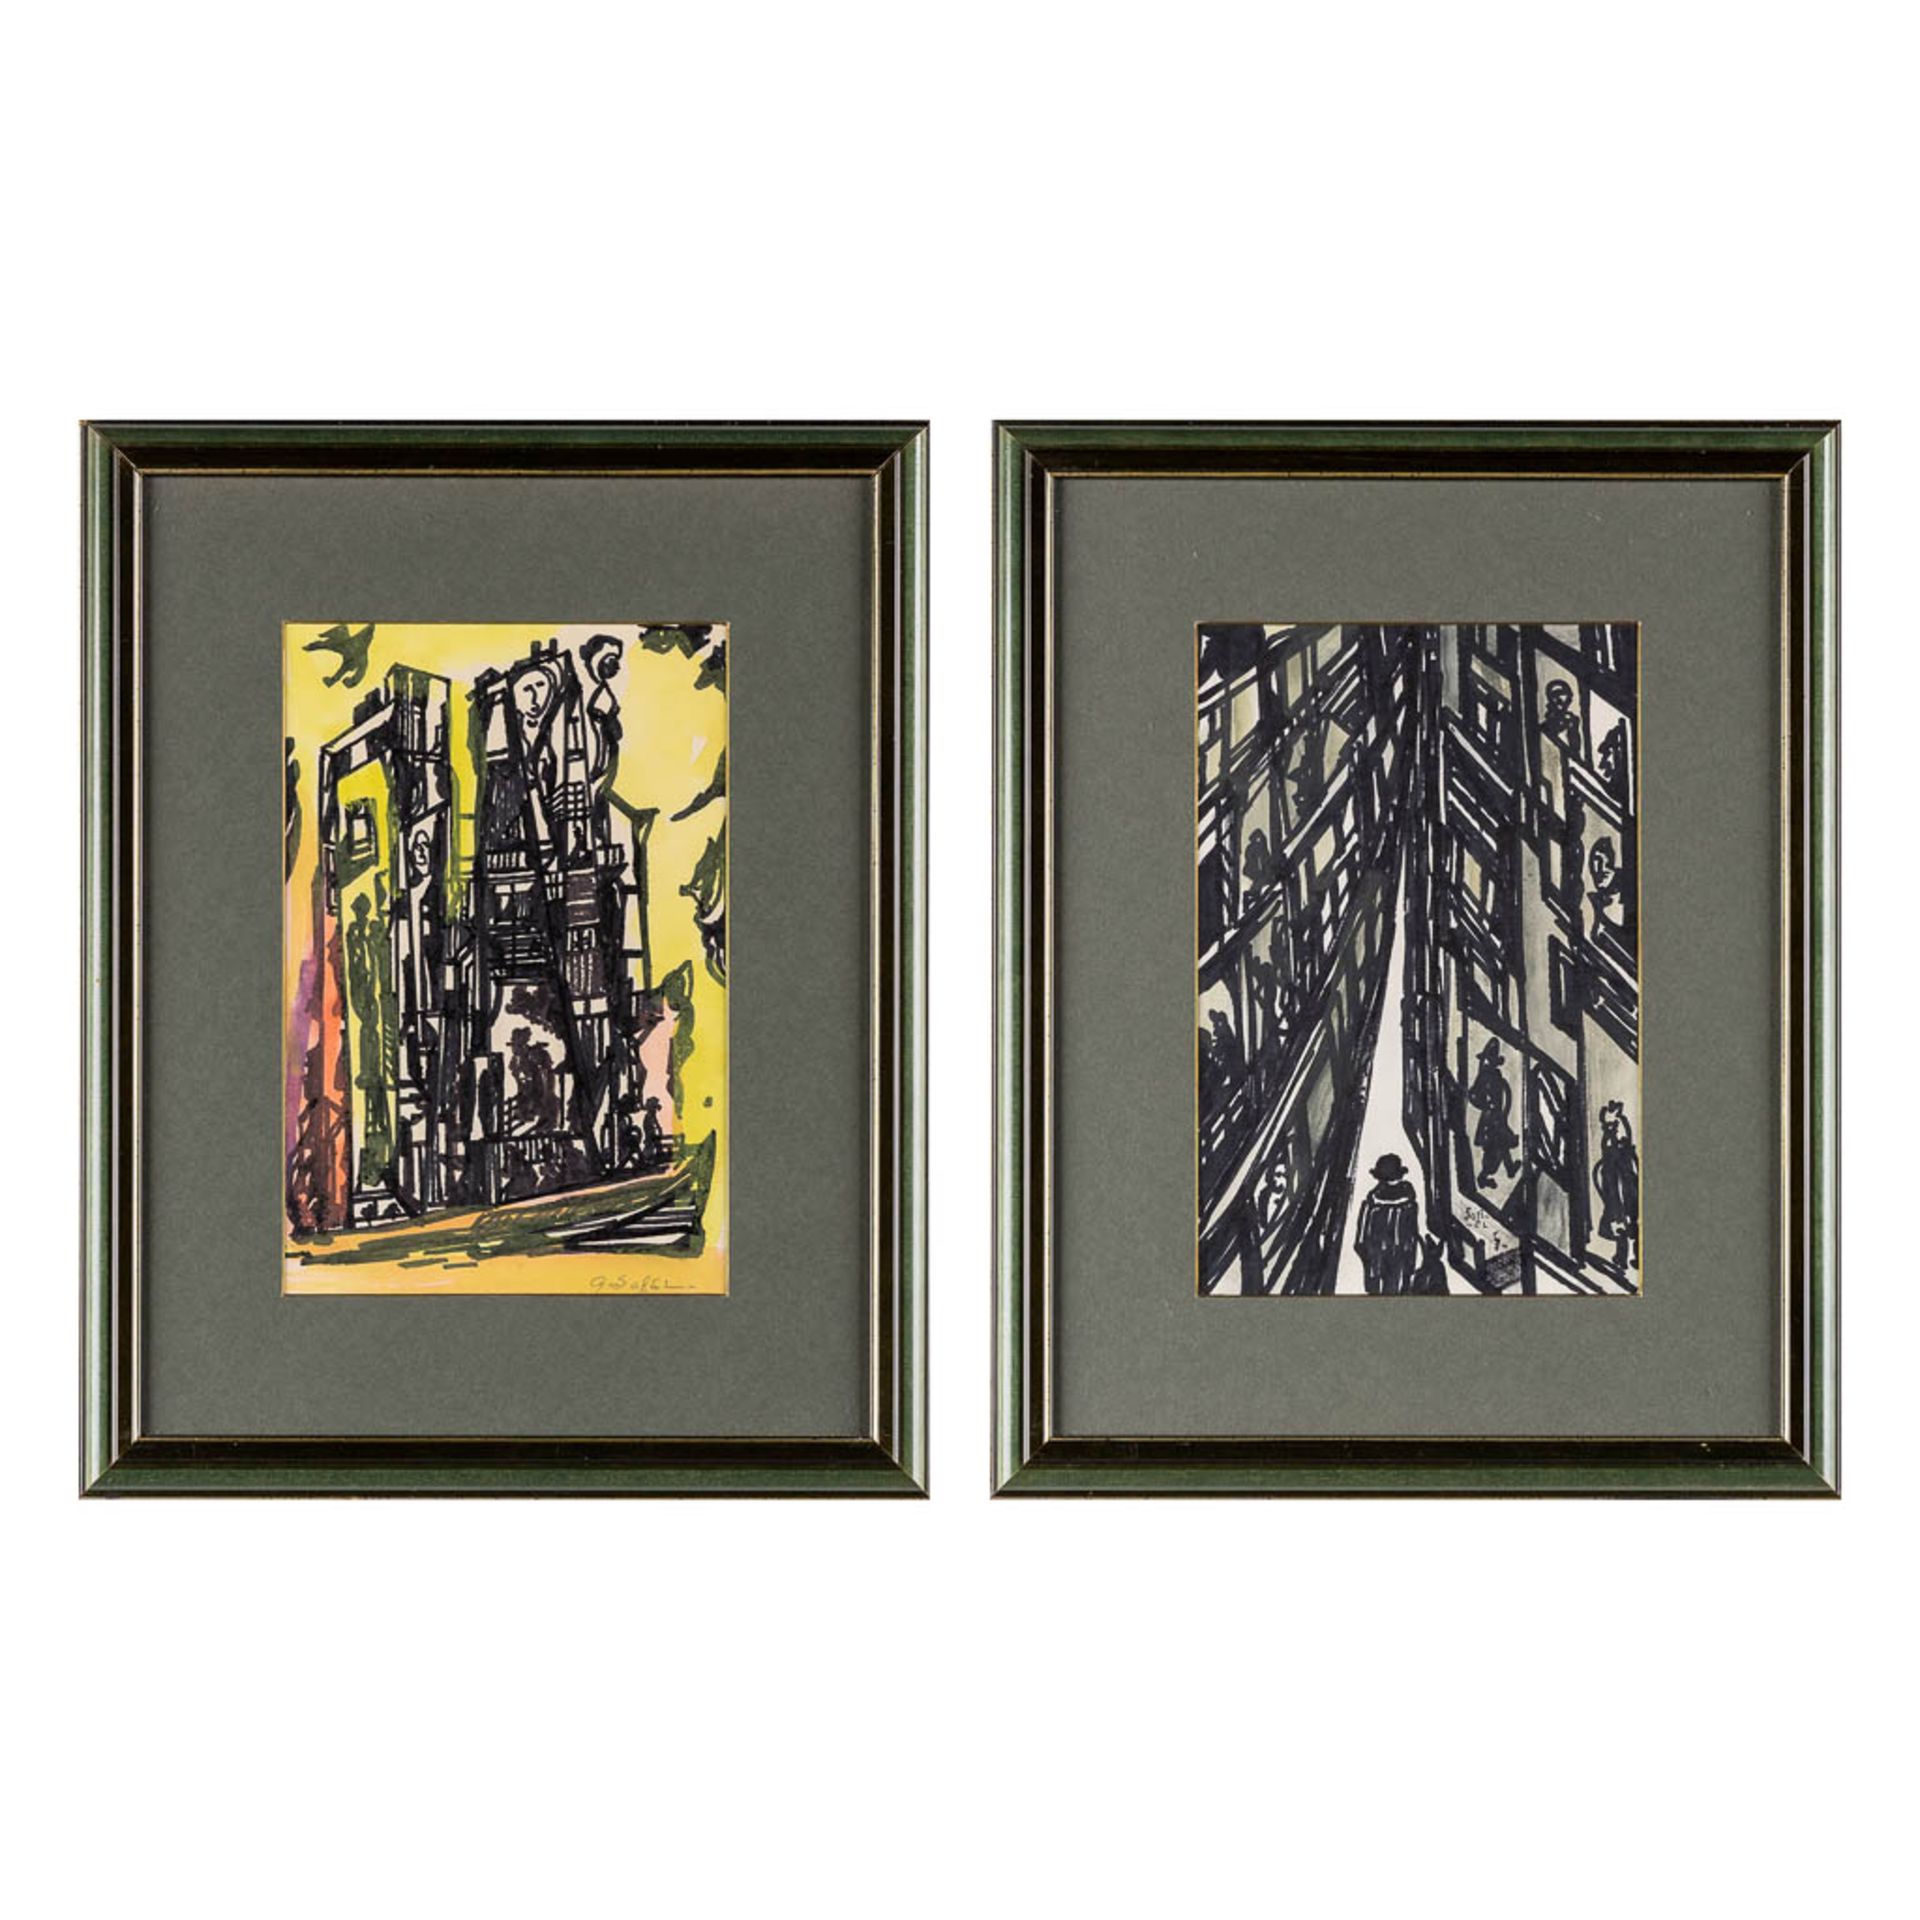 Gustave SOREL (1905-1981) Two abstract drawings, watercolour on paper. (W:18 x H:28 cm)